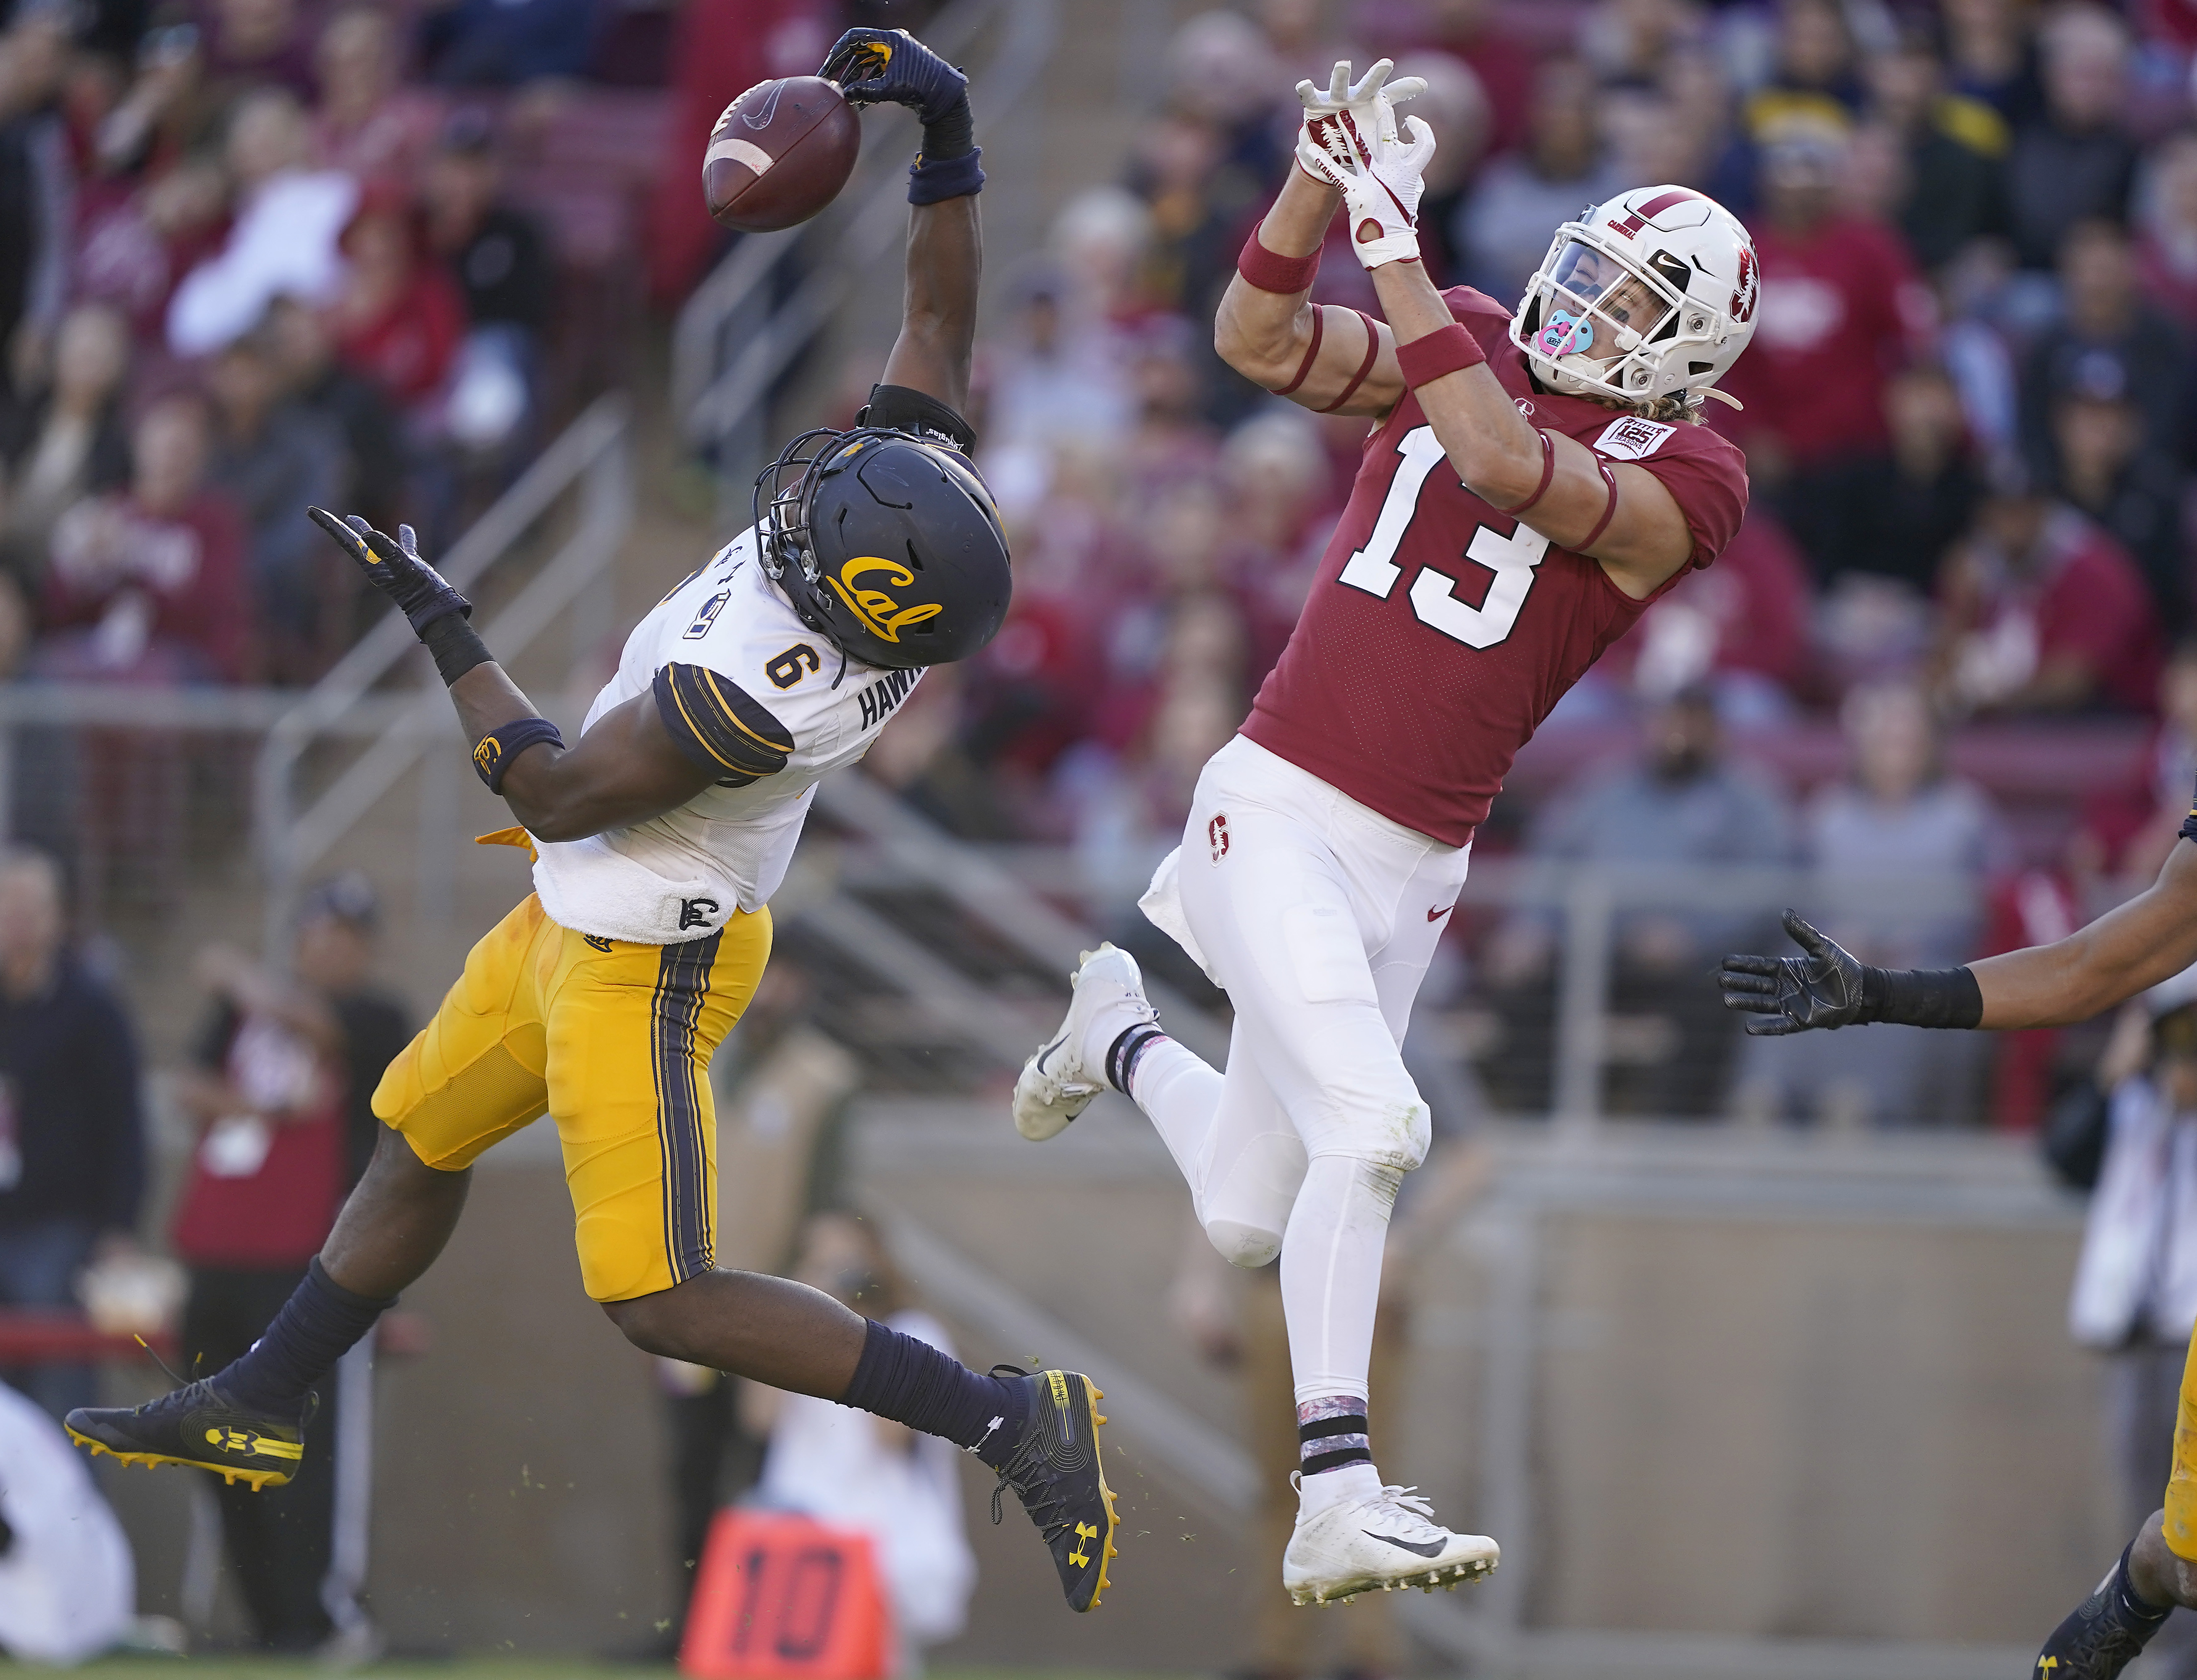 Garbers' late touchdown lifts Cal past Stanford 24-20